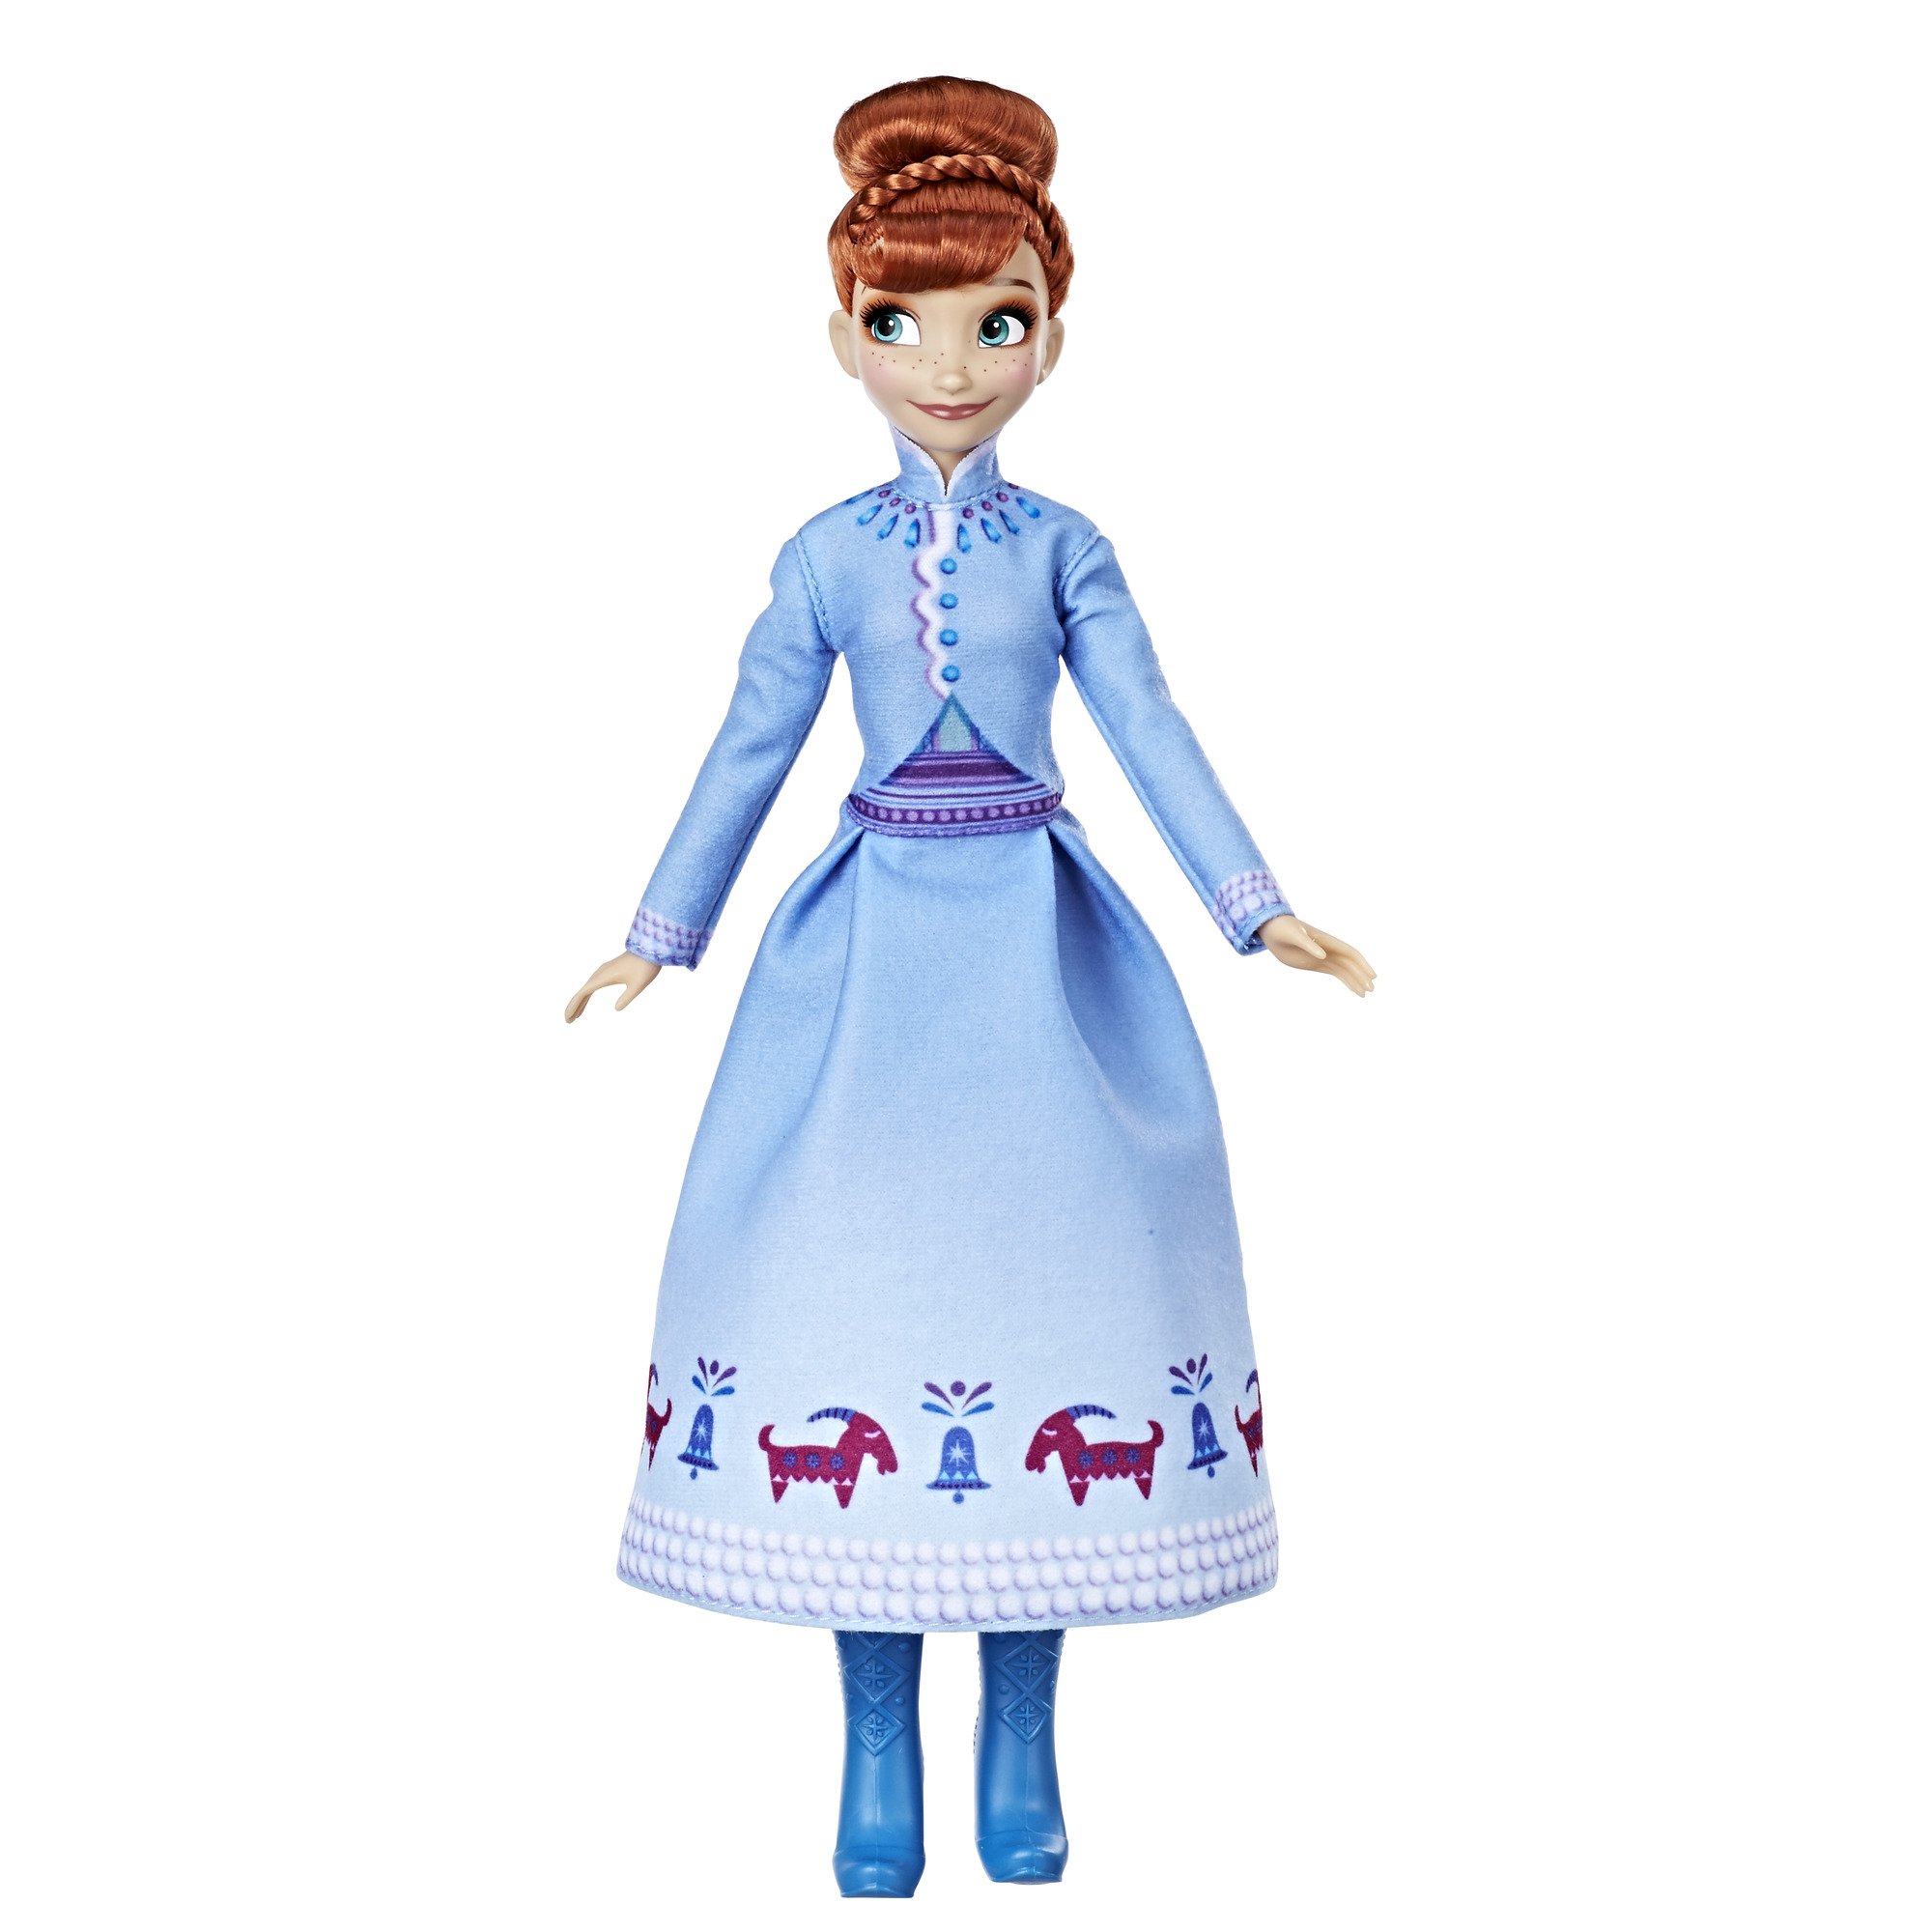 Disney Frozen Olaf\'S Frozen Adventure Anna Doll, Includes Matching Shoes - image 1 of 2